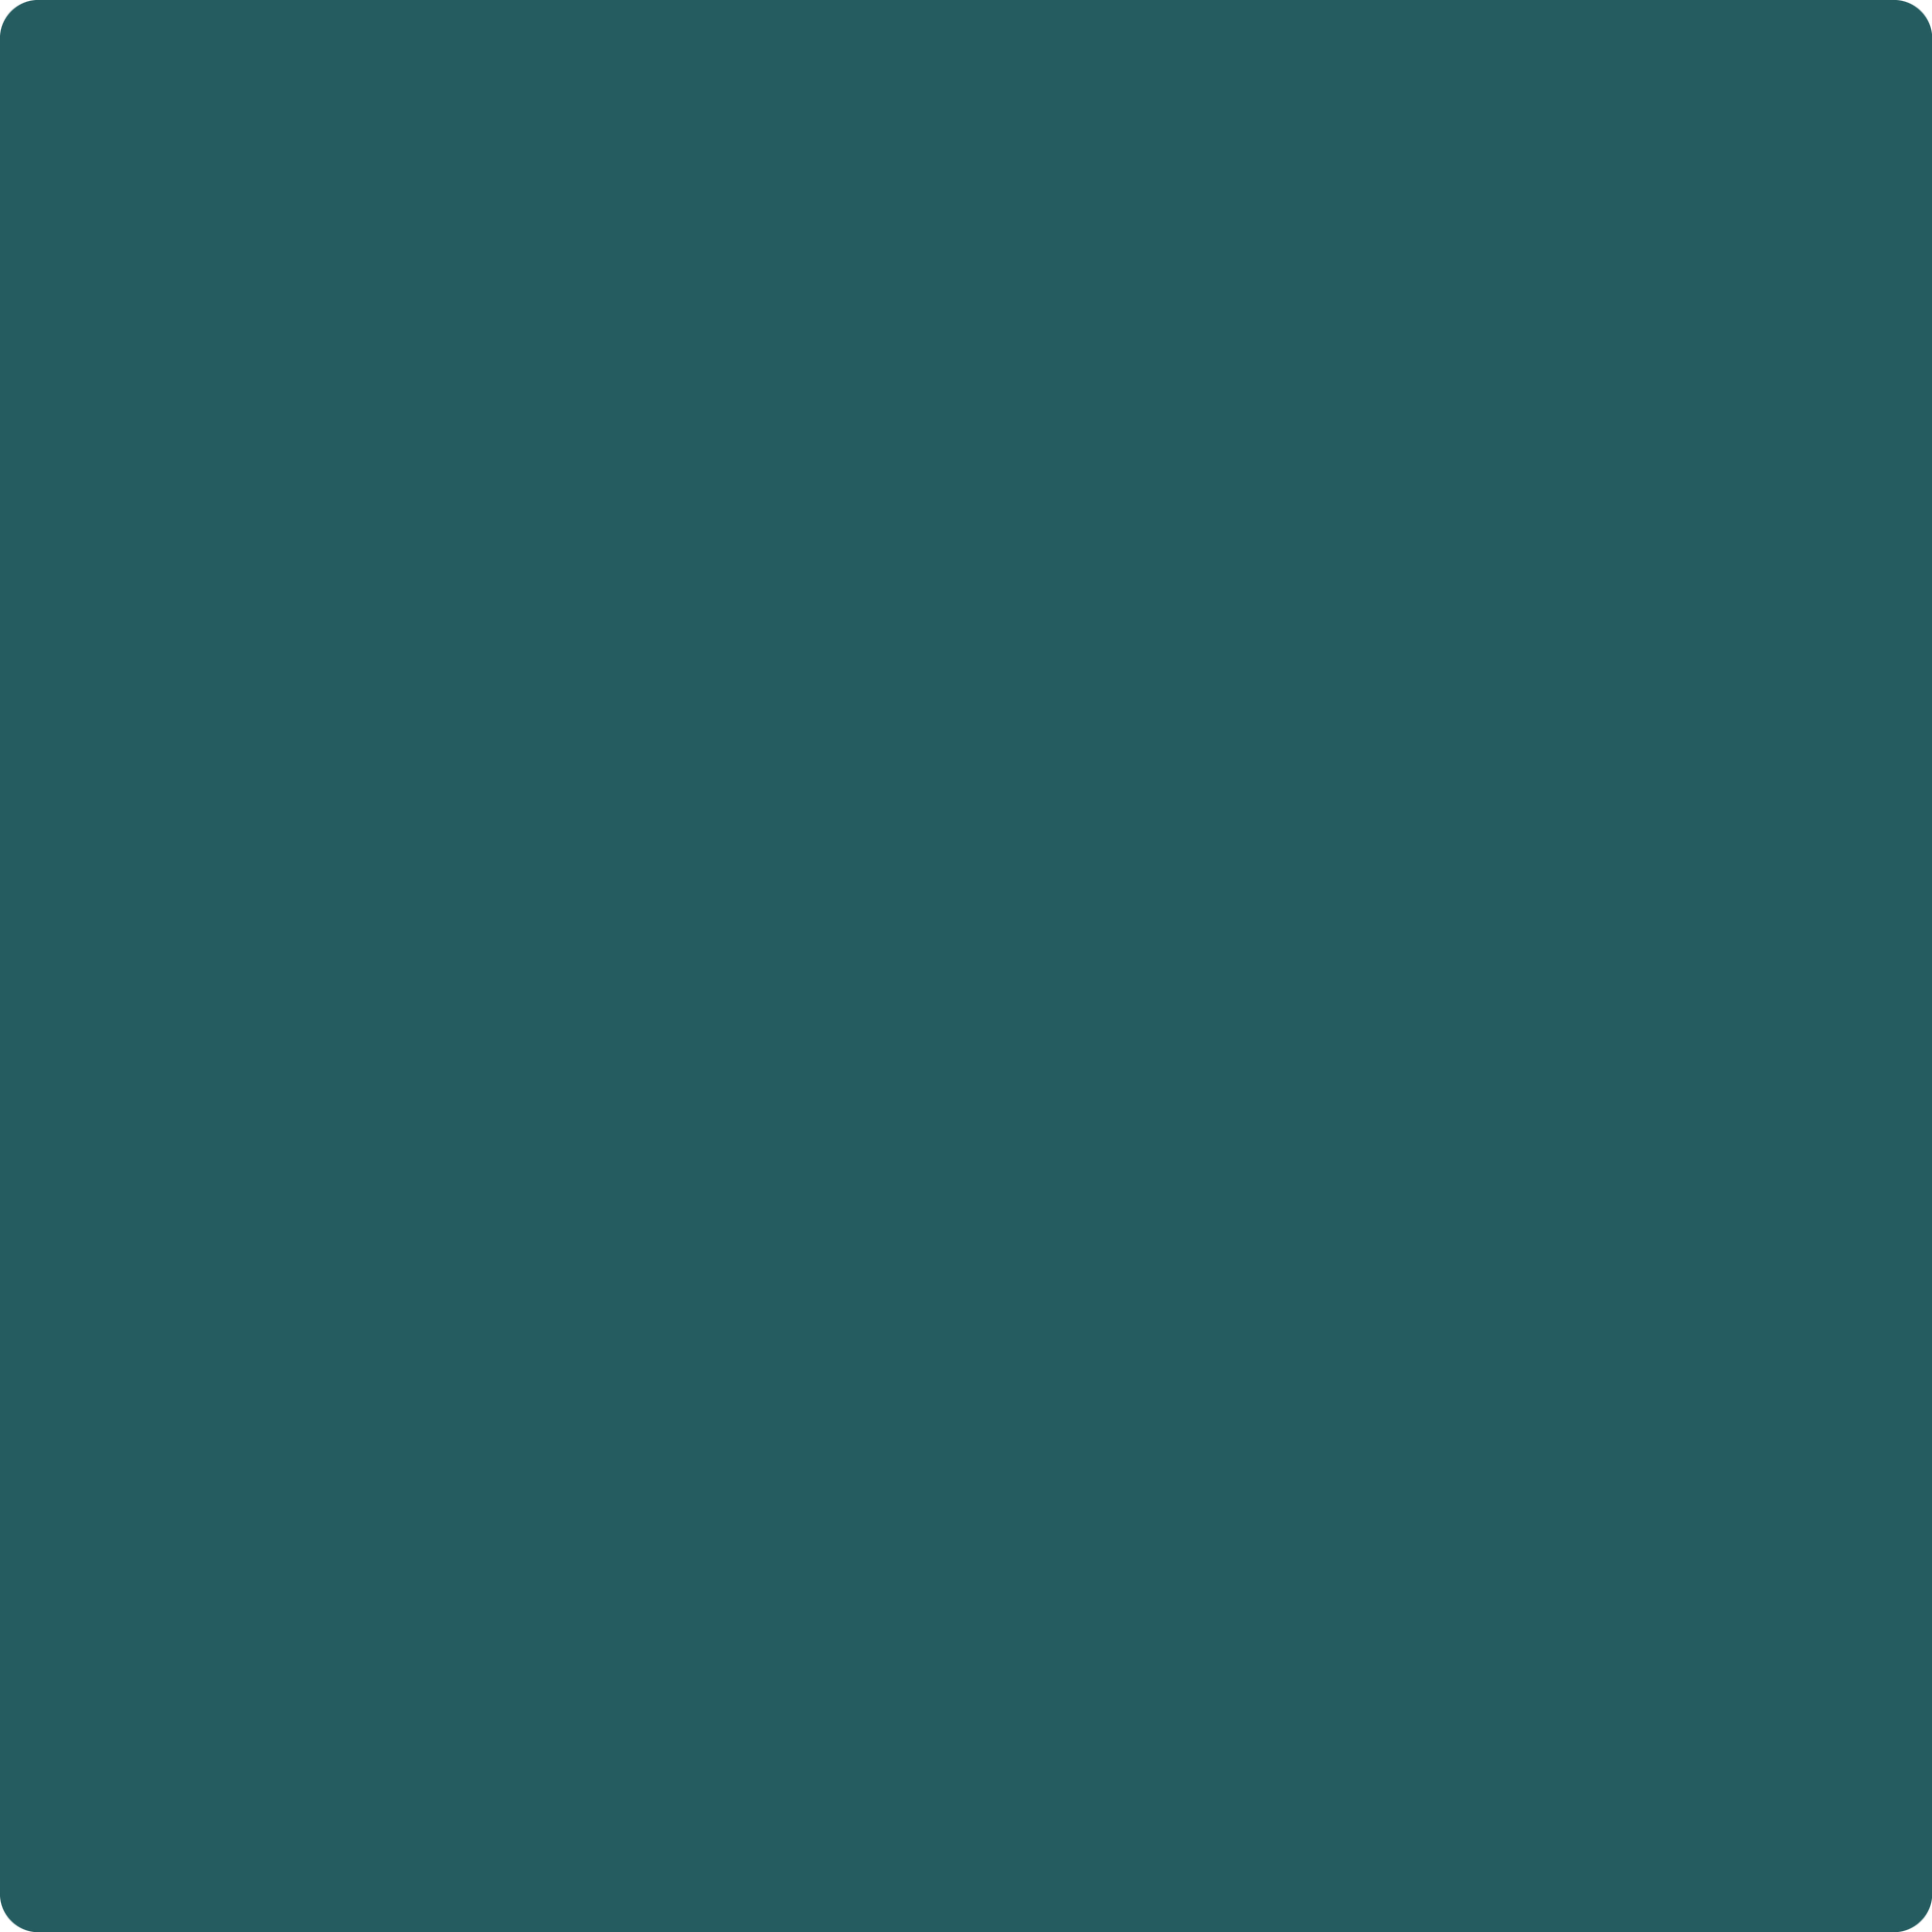 53 Dark Teal A Paint Color By Benjamin Moore Aboff S